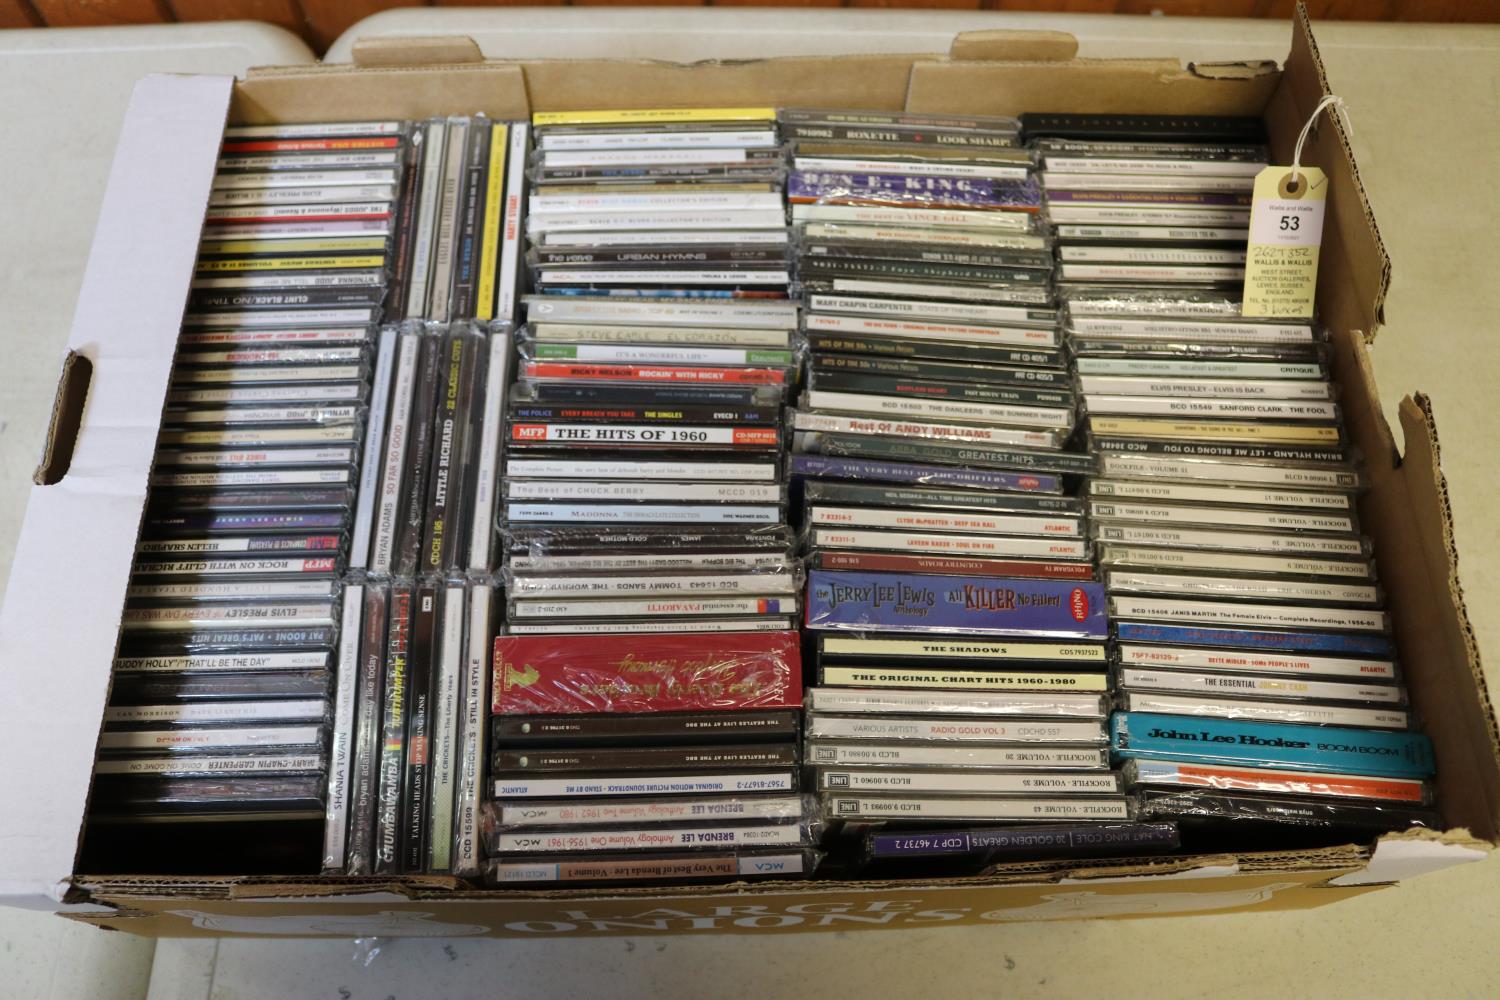 Approx 300 CDs of mainstream rock and pop music from the 1960s to 2000s. Artists include; Cliff